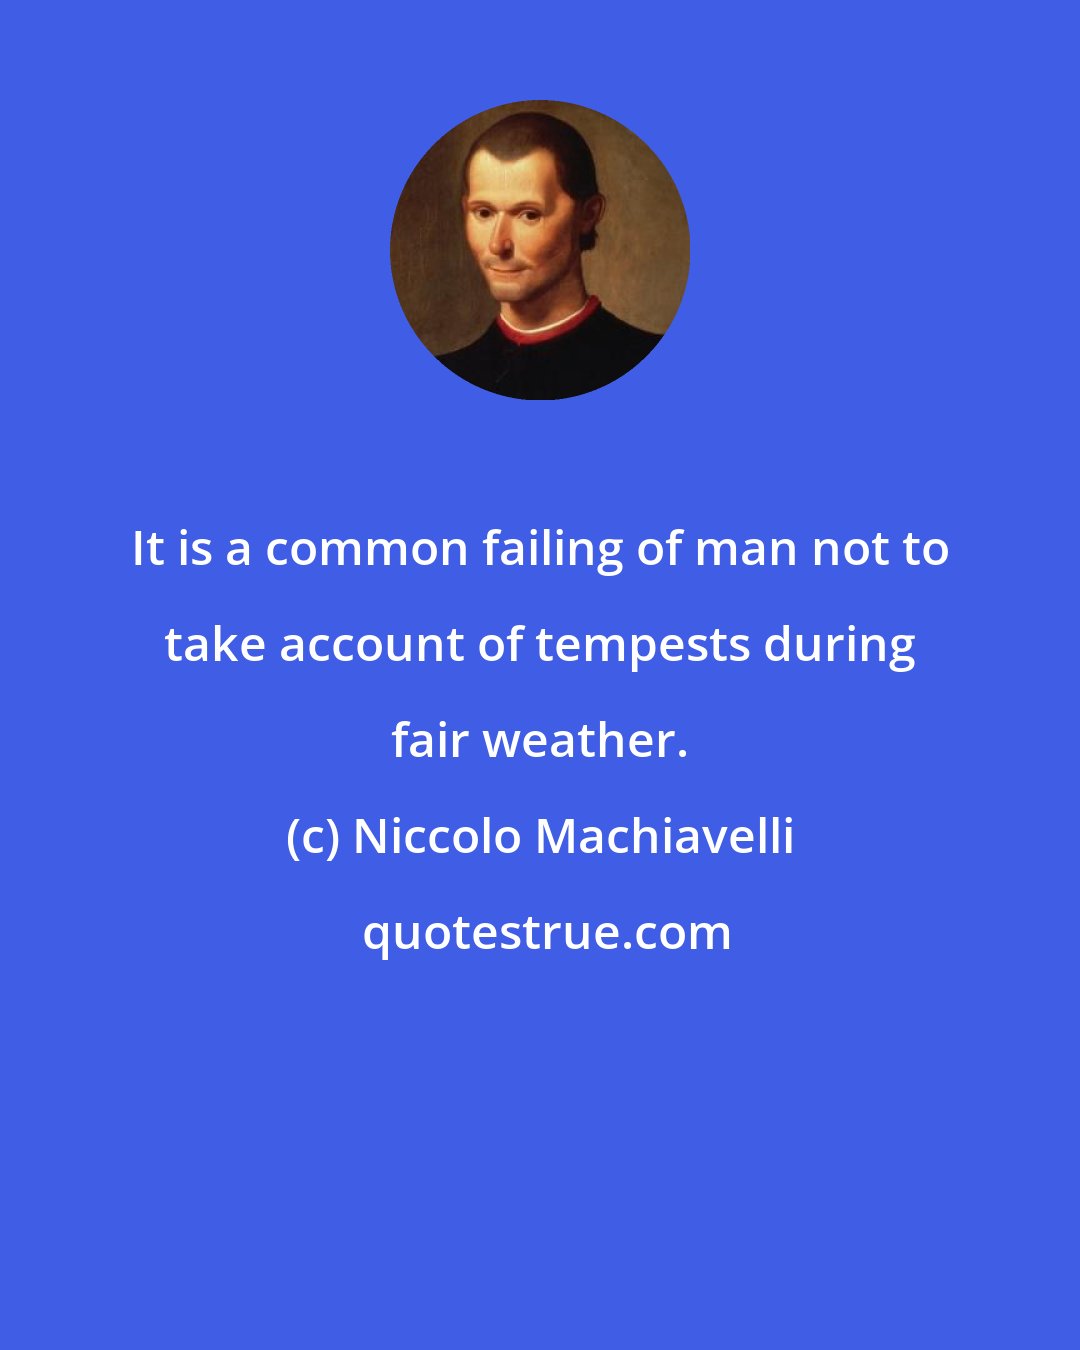 Niccolo Machiavelli: It is a common failing of man not to take account of tempests during fair weather.